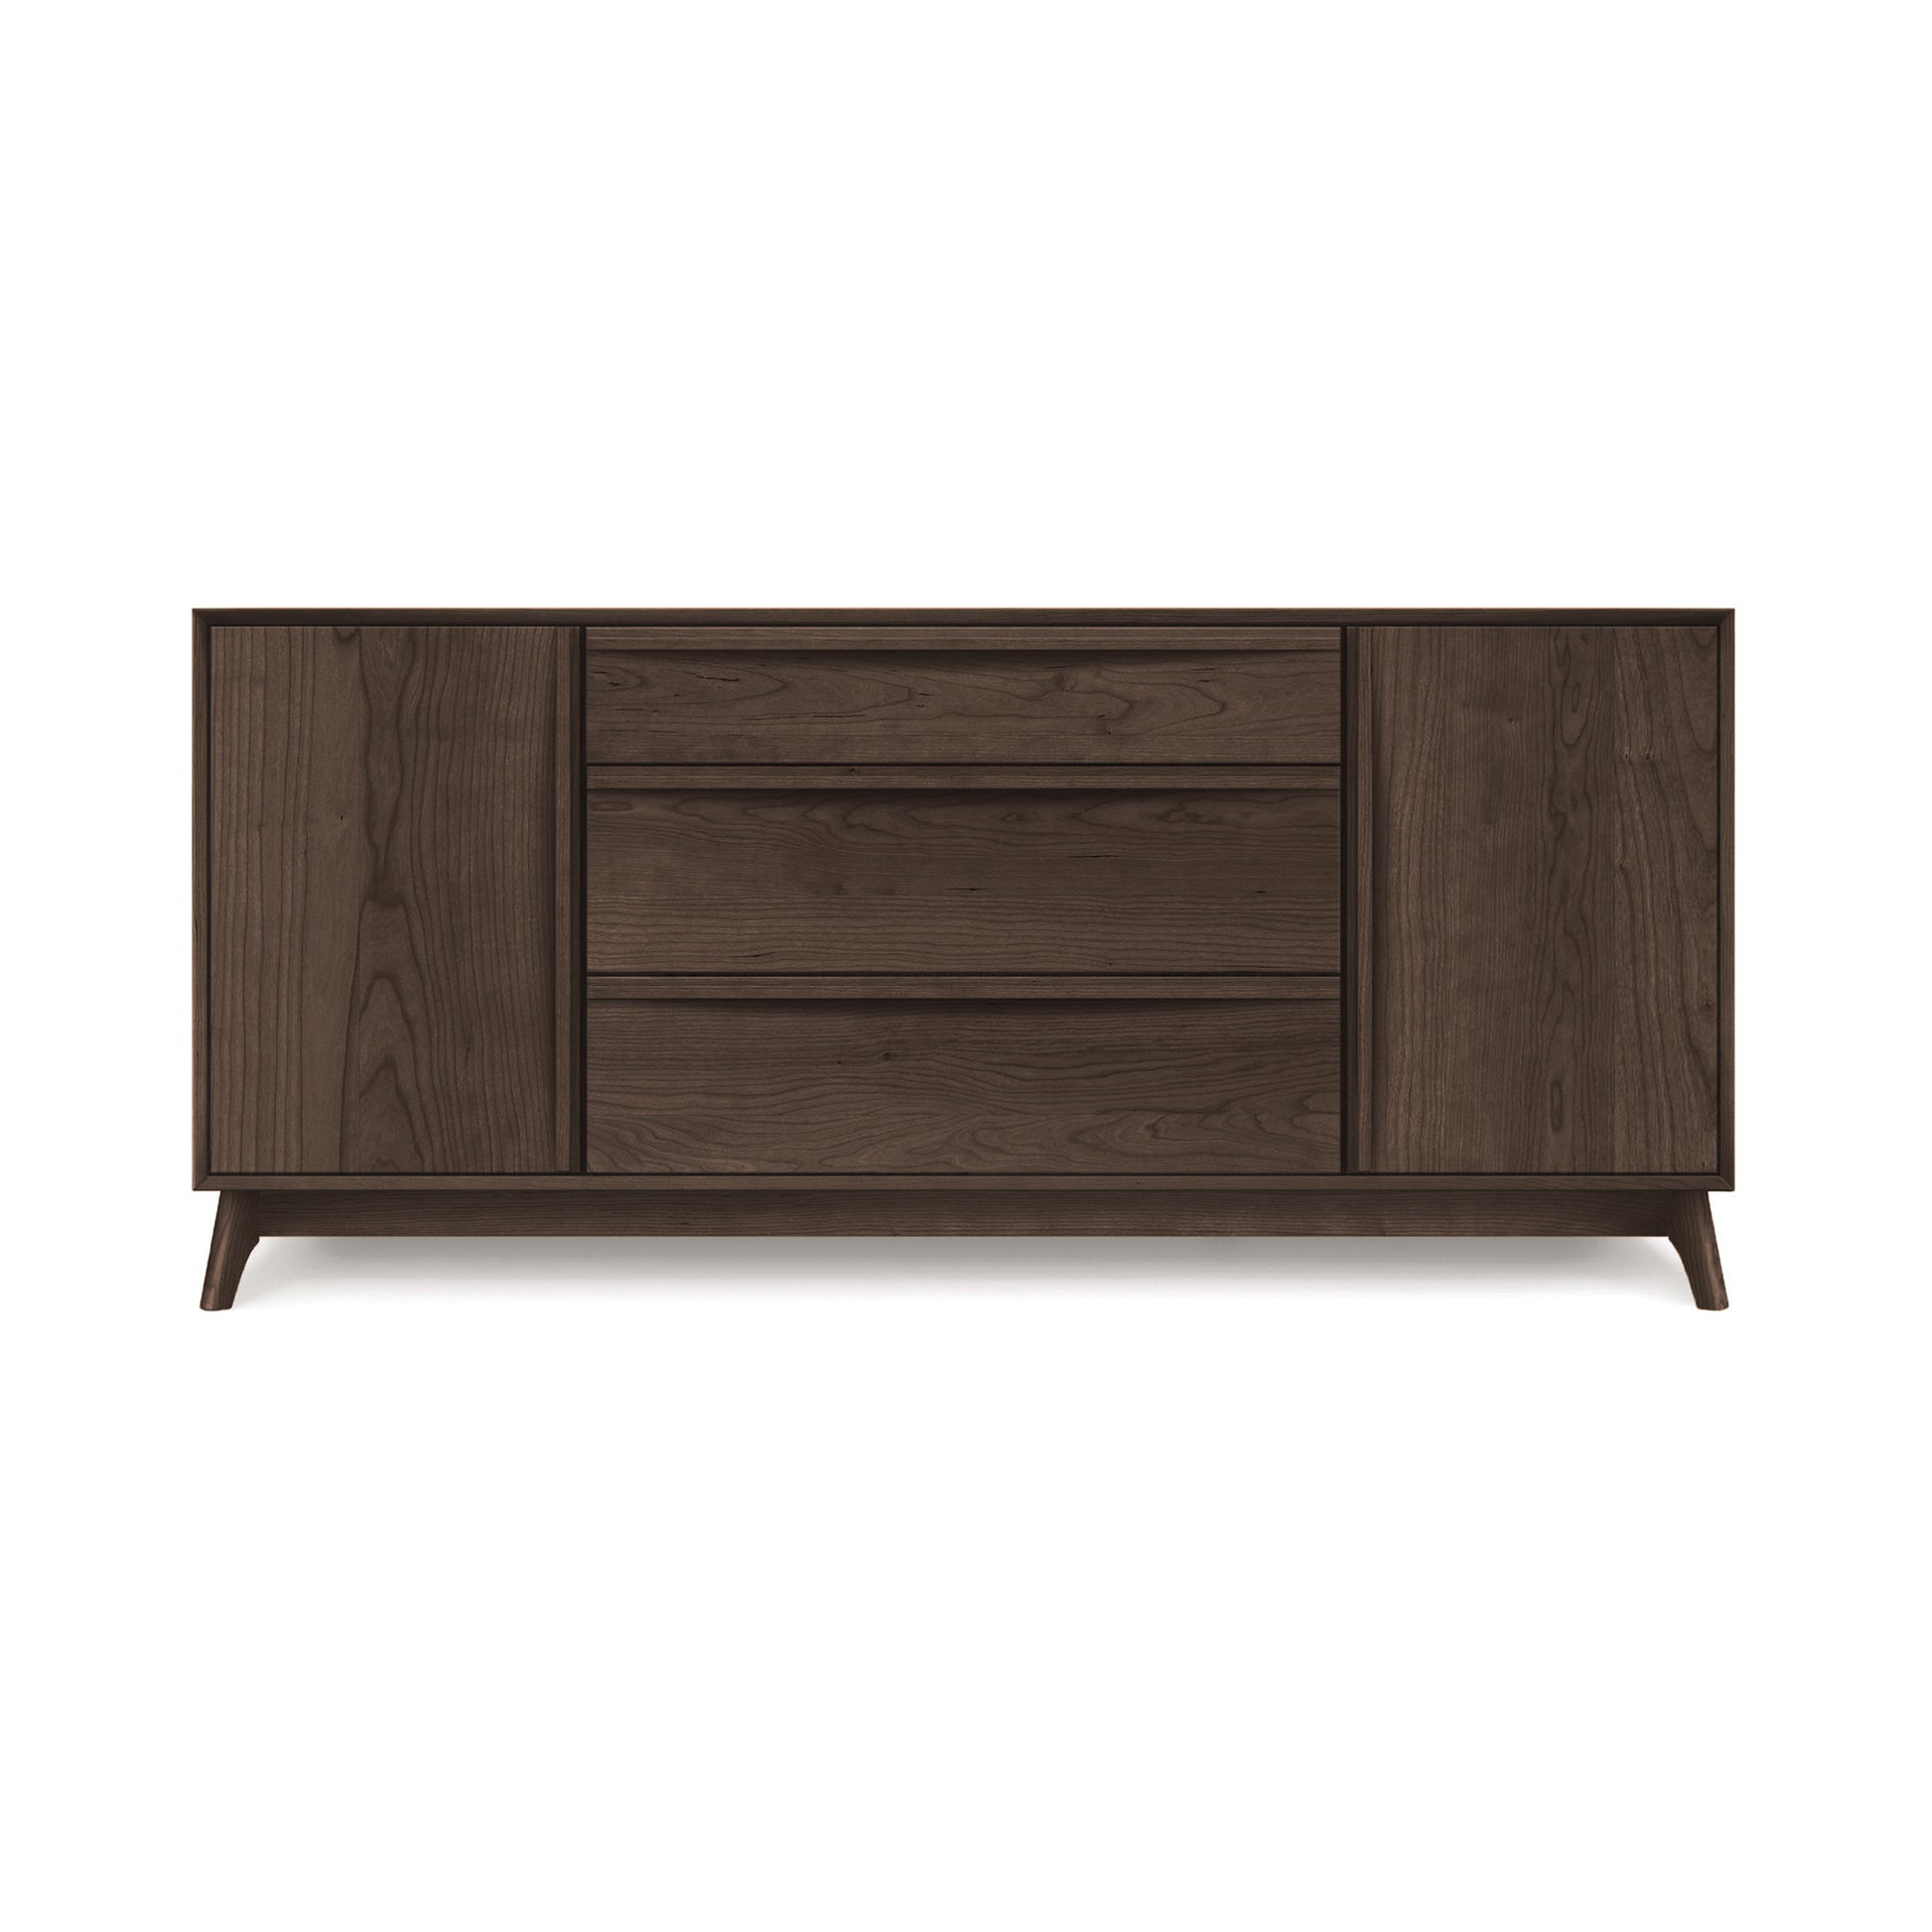 A luxury Copeland Furniture Catalina 3-Drawers, 2-Door Buffet with slanted legs on a white background.